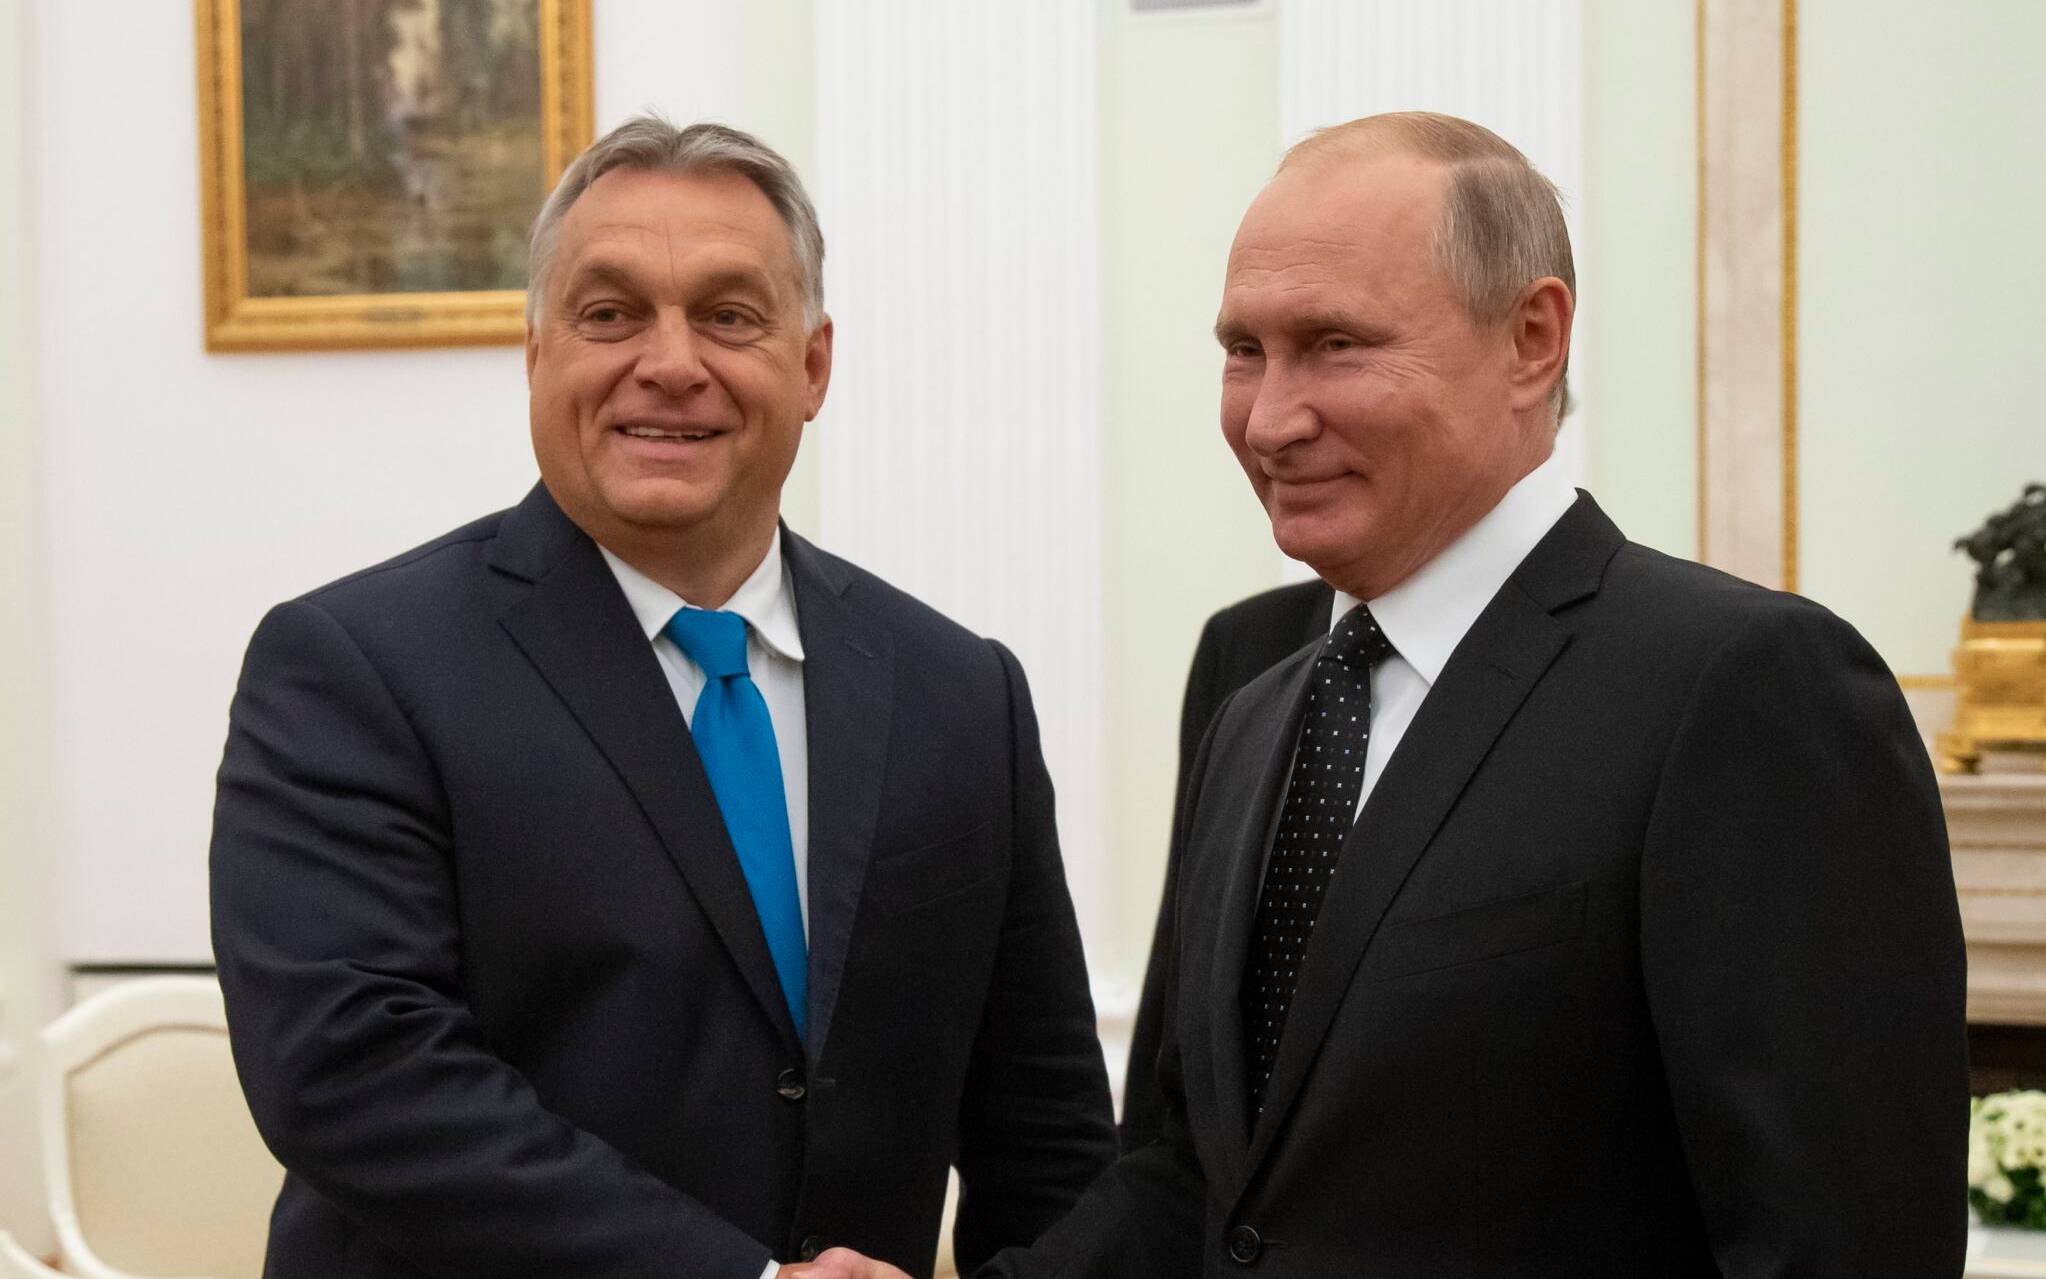 Hungarian Prime Minister Viktor Orban (L) shakes hands with Russian President Vladimir Putin during their meeting in the Kremlin in Moscow, on September 18, 2018. (Photo by Alexander Zemlianichenko / POOL / AFP)